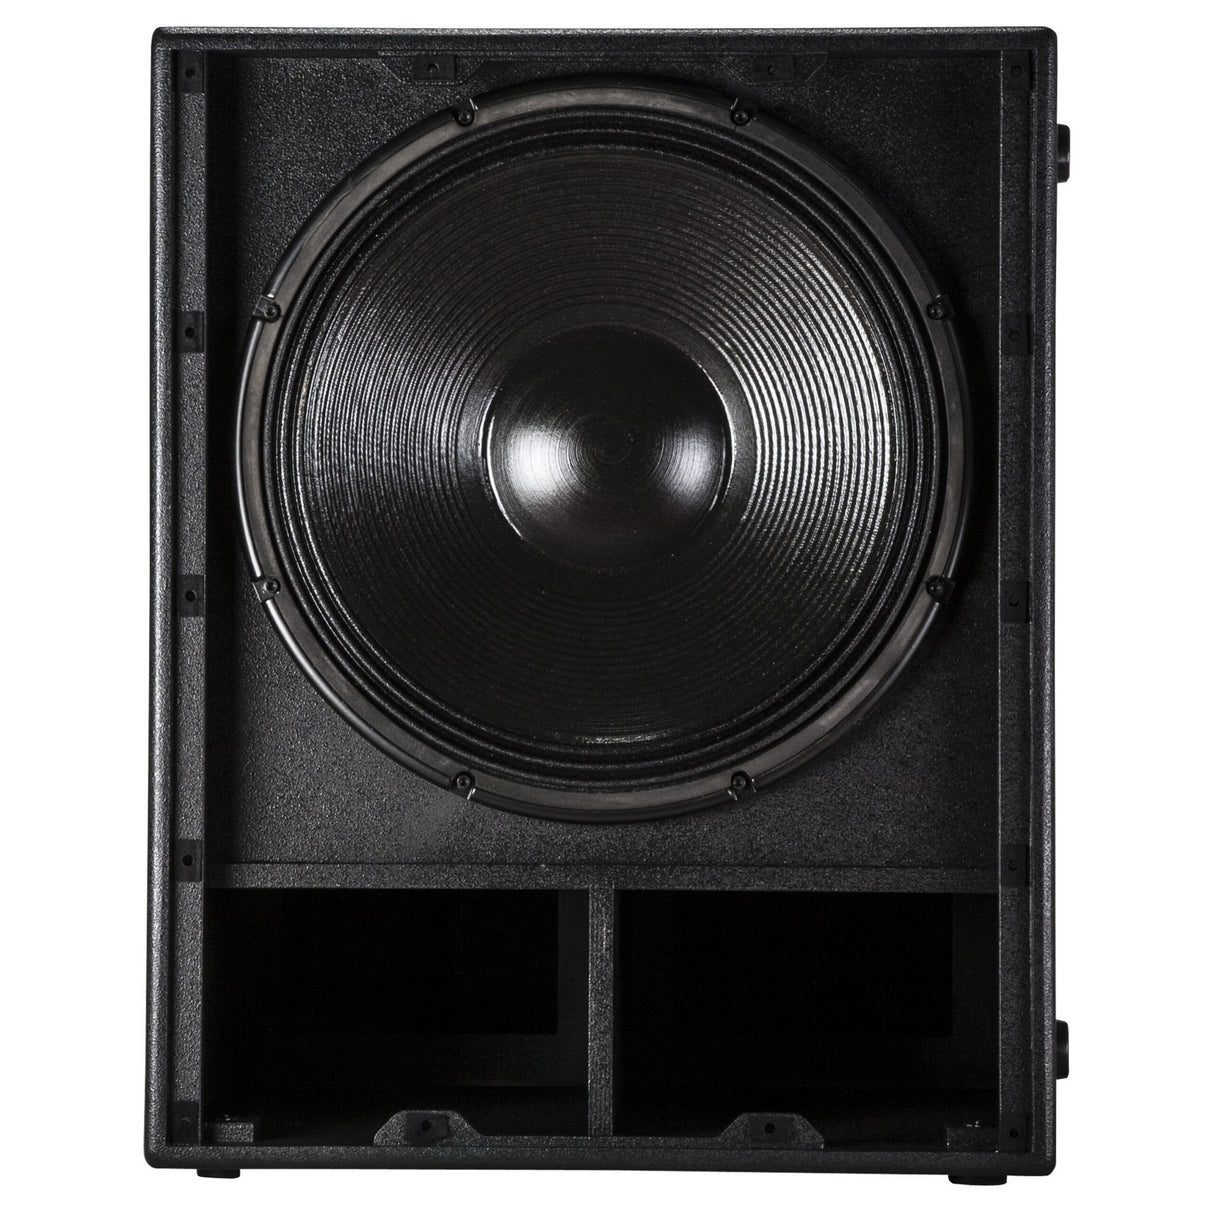 RCF SUB-8004AS Active 18 Inch Powered Subwoofer